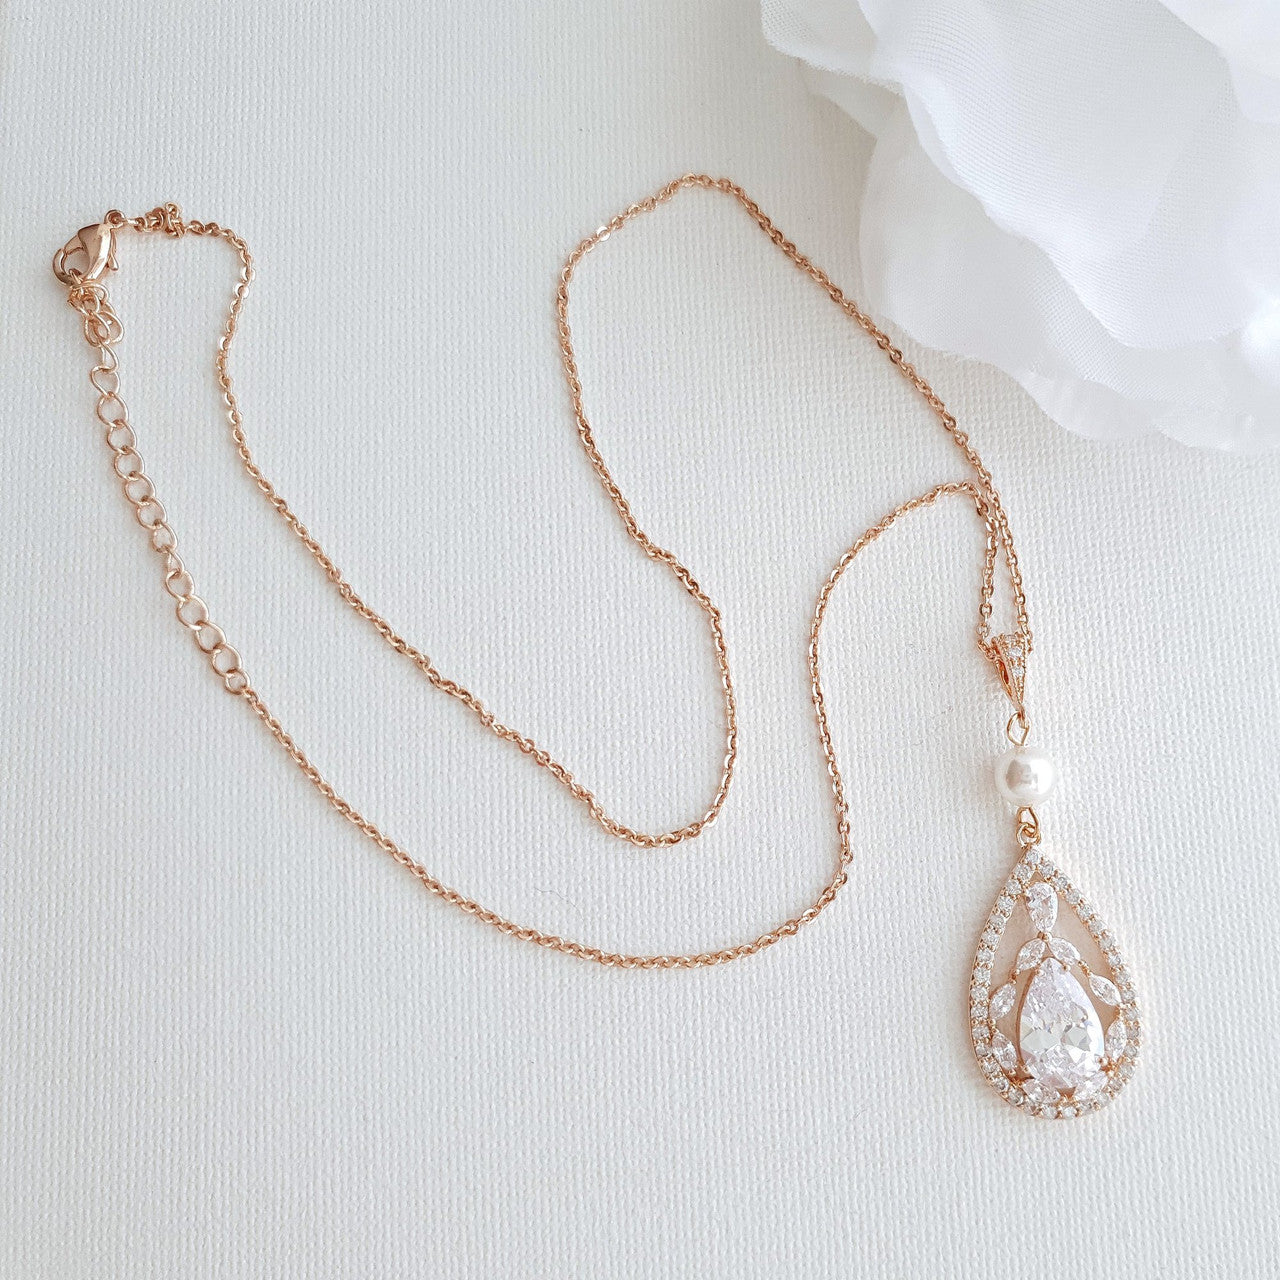 Bridal Pendant Necklace with Teardrop CZ Crystals-Esther